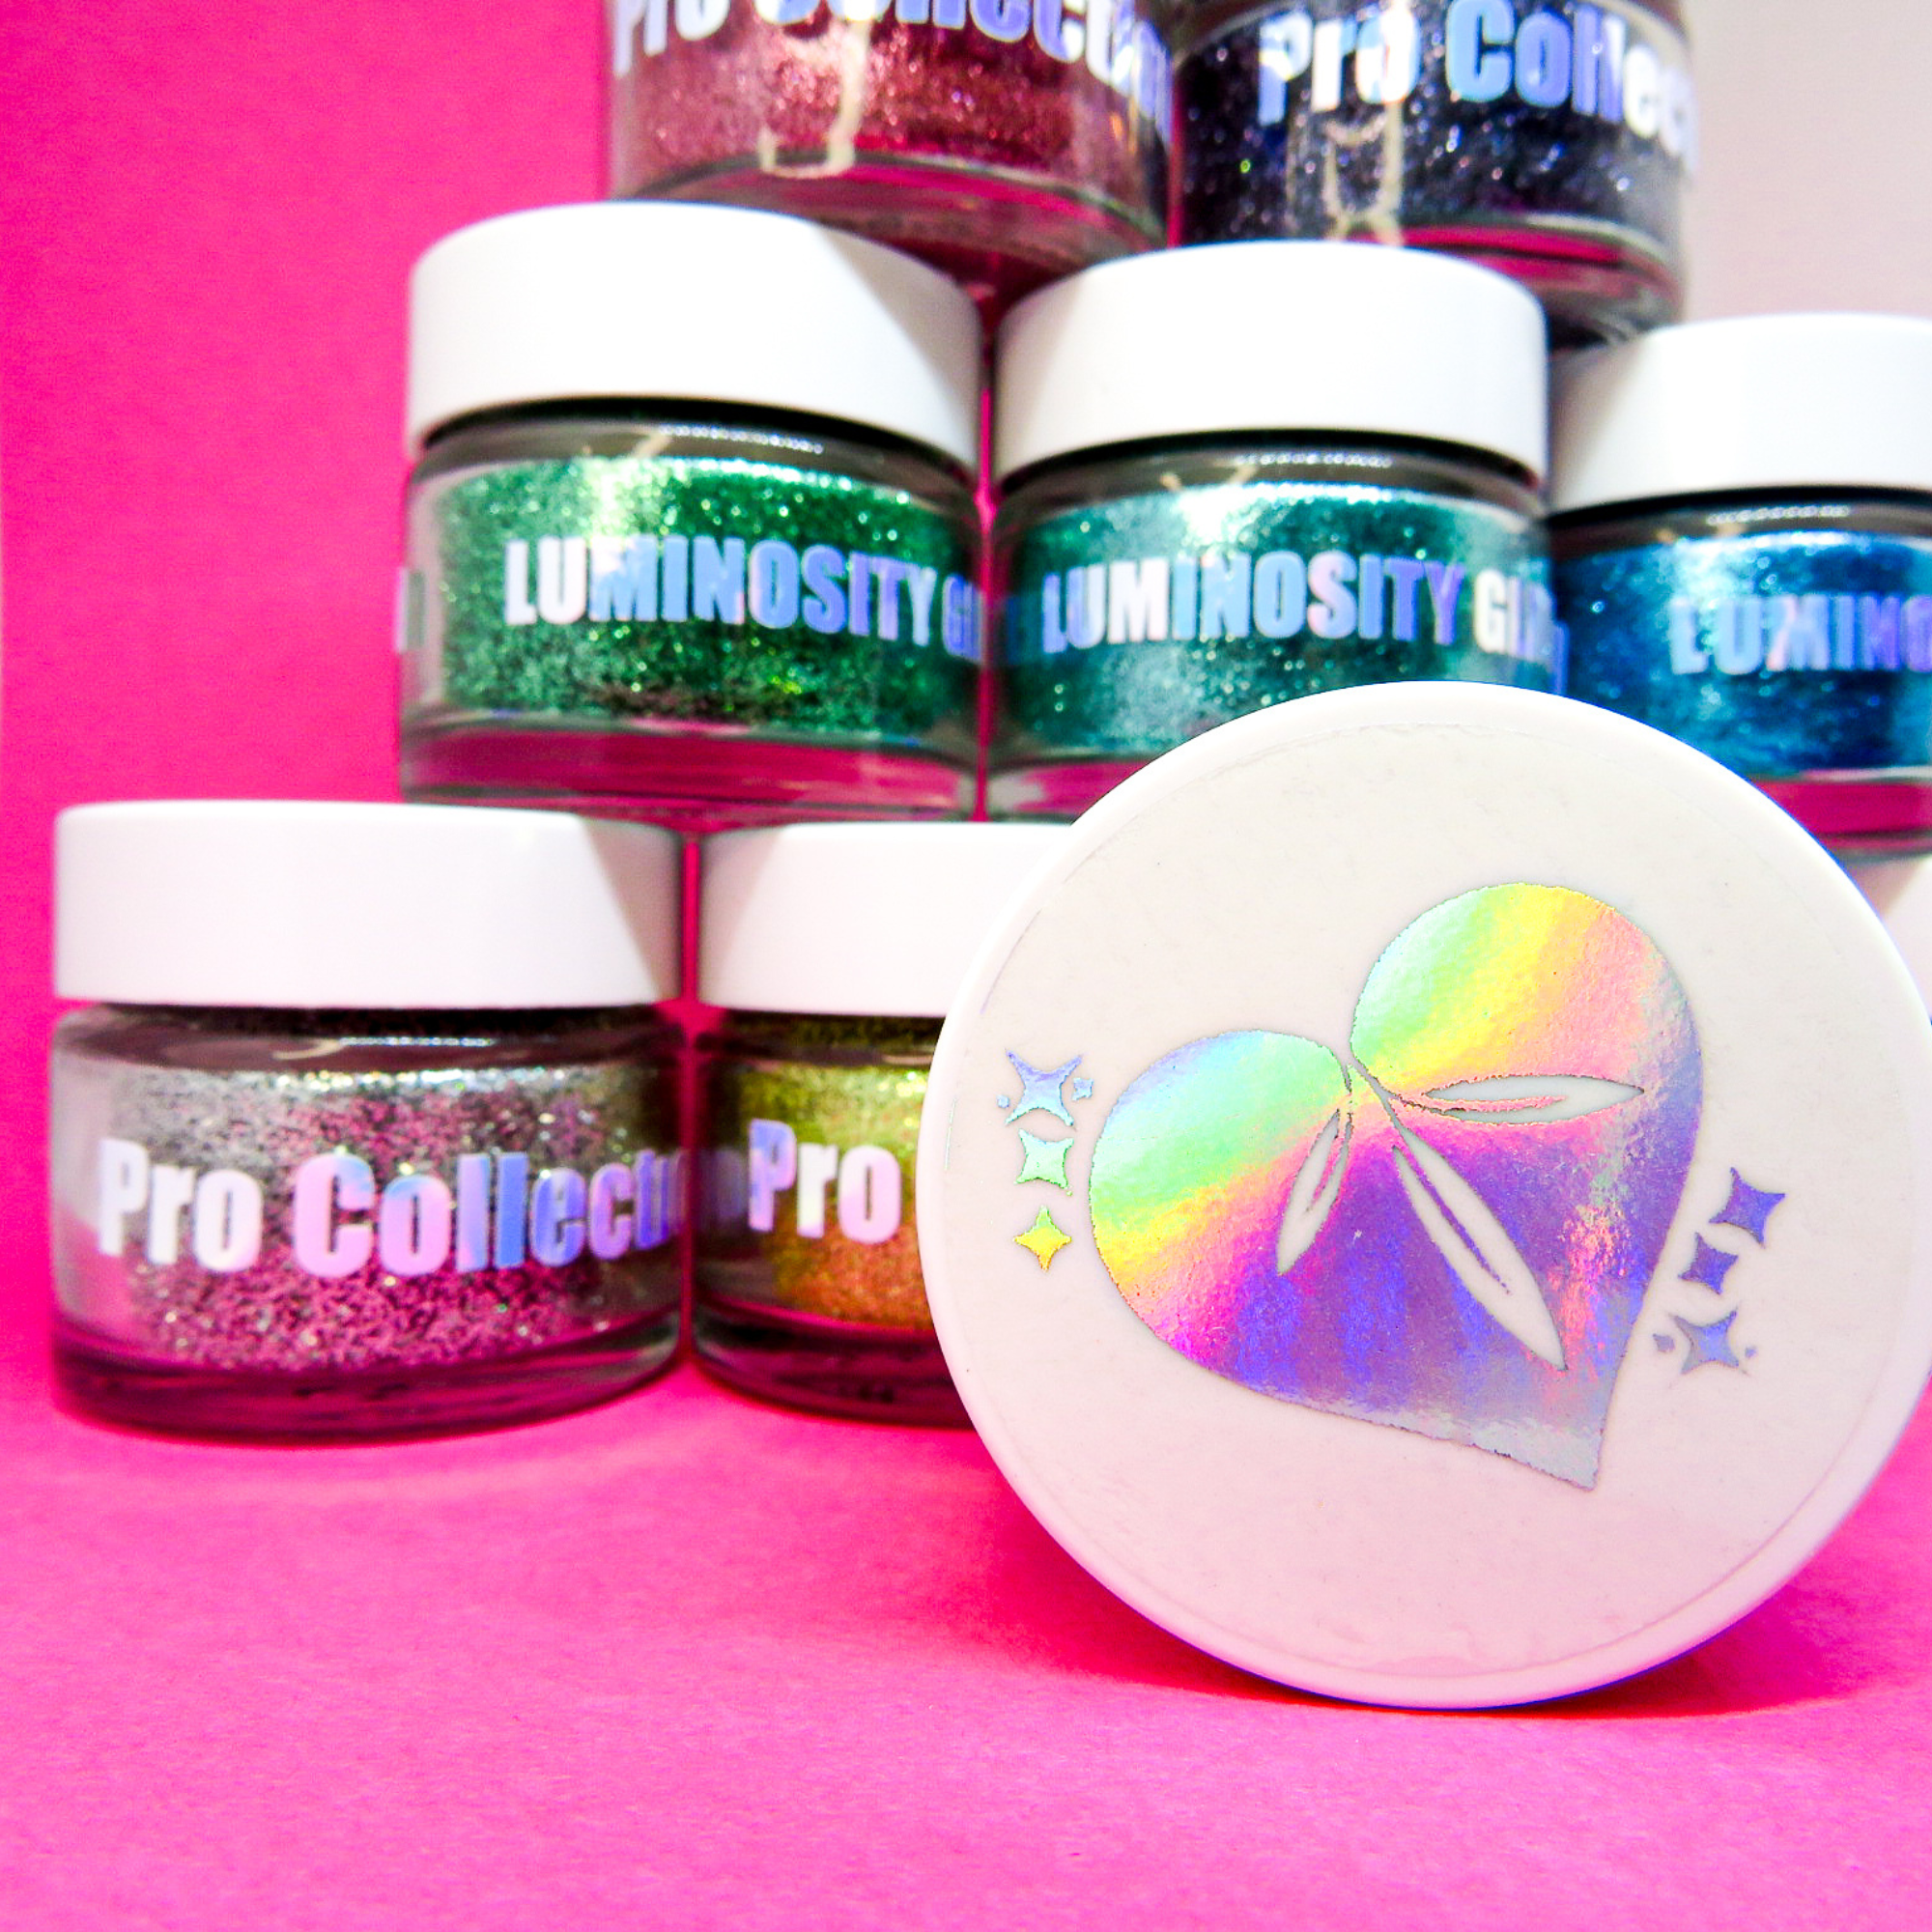 Stardust biodegradable glitter range by Luminosity Glitter. The 15ml pots come with holographic silver stickers